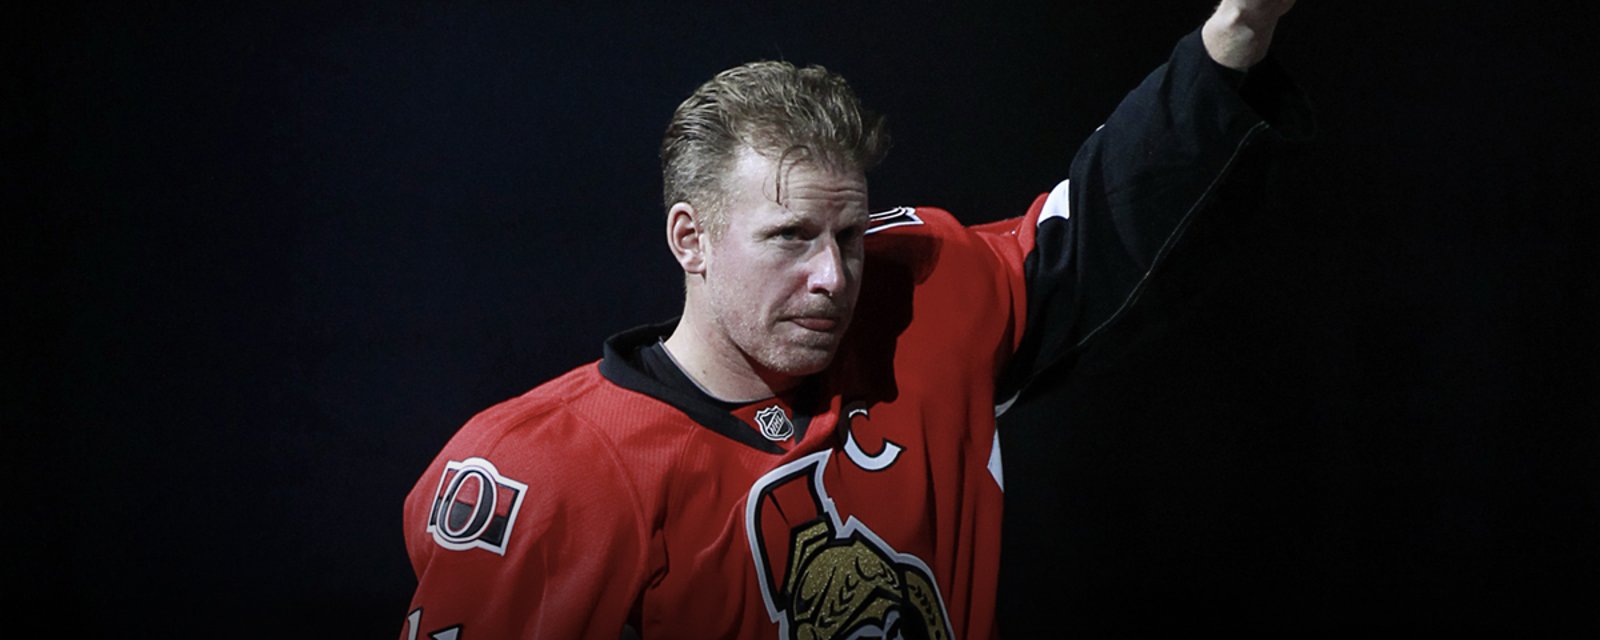 Breaking: Alfredsson will play for the Sens on Parliament Hill